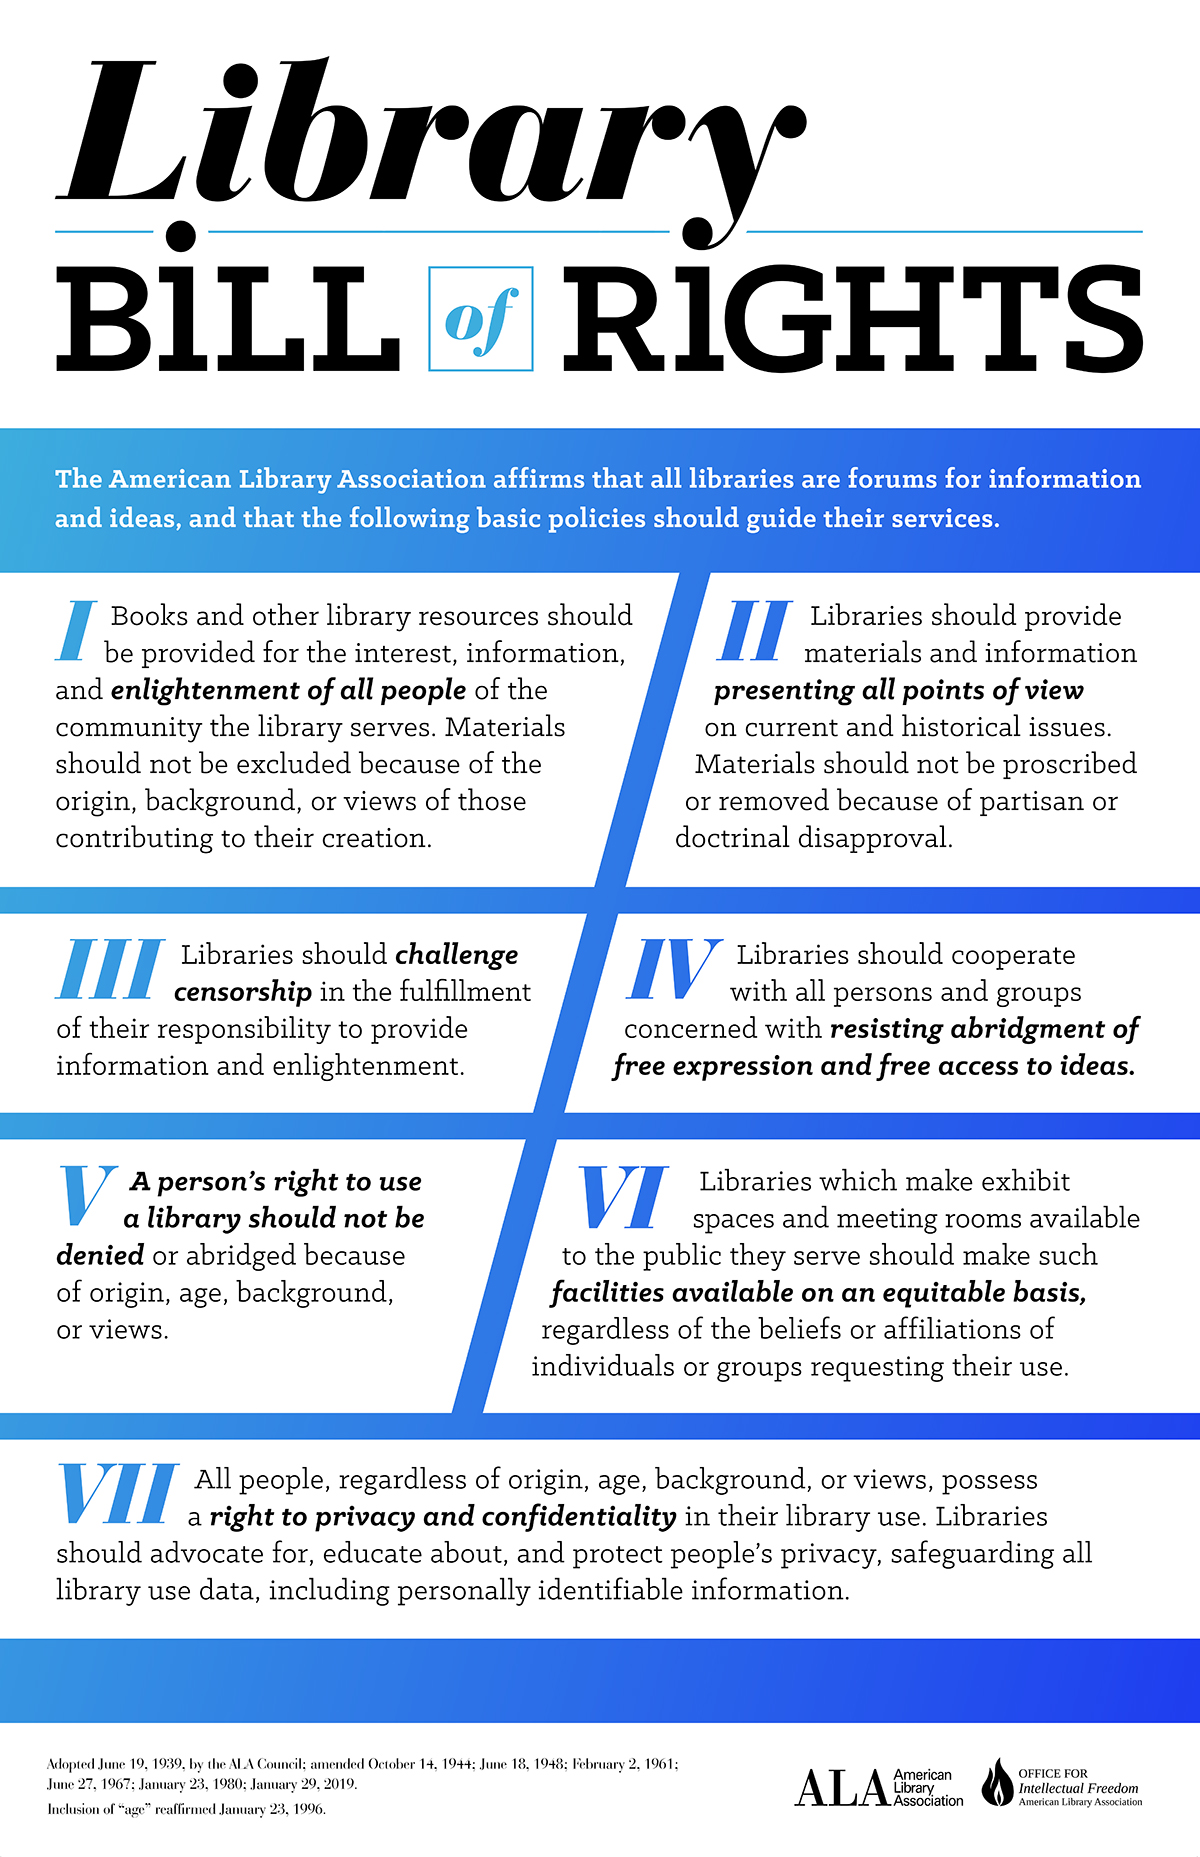 Library Bill of Rights.  The American Library Association affirms that all libraries are forums for information and ideas, and that the following basic policies should guide their services. I. Books and other library resources should be provided for the interest, information, and enlightenment of all people of the community the library serves. Materials should not be excluded because of the origin, background, or views of those contributing to their creation. II. Libraries should provide materials and information presenting all points of view on current and historical issues. Materials should not be proscribed or removed because of partisan or doctrinal disapproval. III. Libraries should challenge censorship in the fulfillment of their responsibility to provide information and enlightenment. IV. Libraries should cooperate with all persons and groups concerned with resisting abridgment of free expression and free access to ideas. V. A person’s right to use a library should not be denied or abridged because of origin, age, background, or views. VI. Libraries which make exhibit spaces and meeting rooms available to the public they serve should make such facilities available on an equitable basis, regardless of the beliefs or affiliations of individuals or groups requesting their use. VII. All people, regardless of origin, age, background, or views, possess a right to privacy and confidentiality in their library use. Libraries should advocate for, educate about, and protect people’s privacy, safeguarding all library use data, including personally identifiable information. STATEMENT Freedom to Read & THE THE Adopted June 19, 1939, by the ALA Council; amended October 14, 1944; June 18, 1948; February 2, 1961; June 27, 1967; January 23, 1980; January 29, 2019. Inclusion of “age” reaffirmed January 23, 1996. BROUGHT TO YOU BY THE Freedo